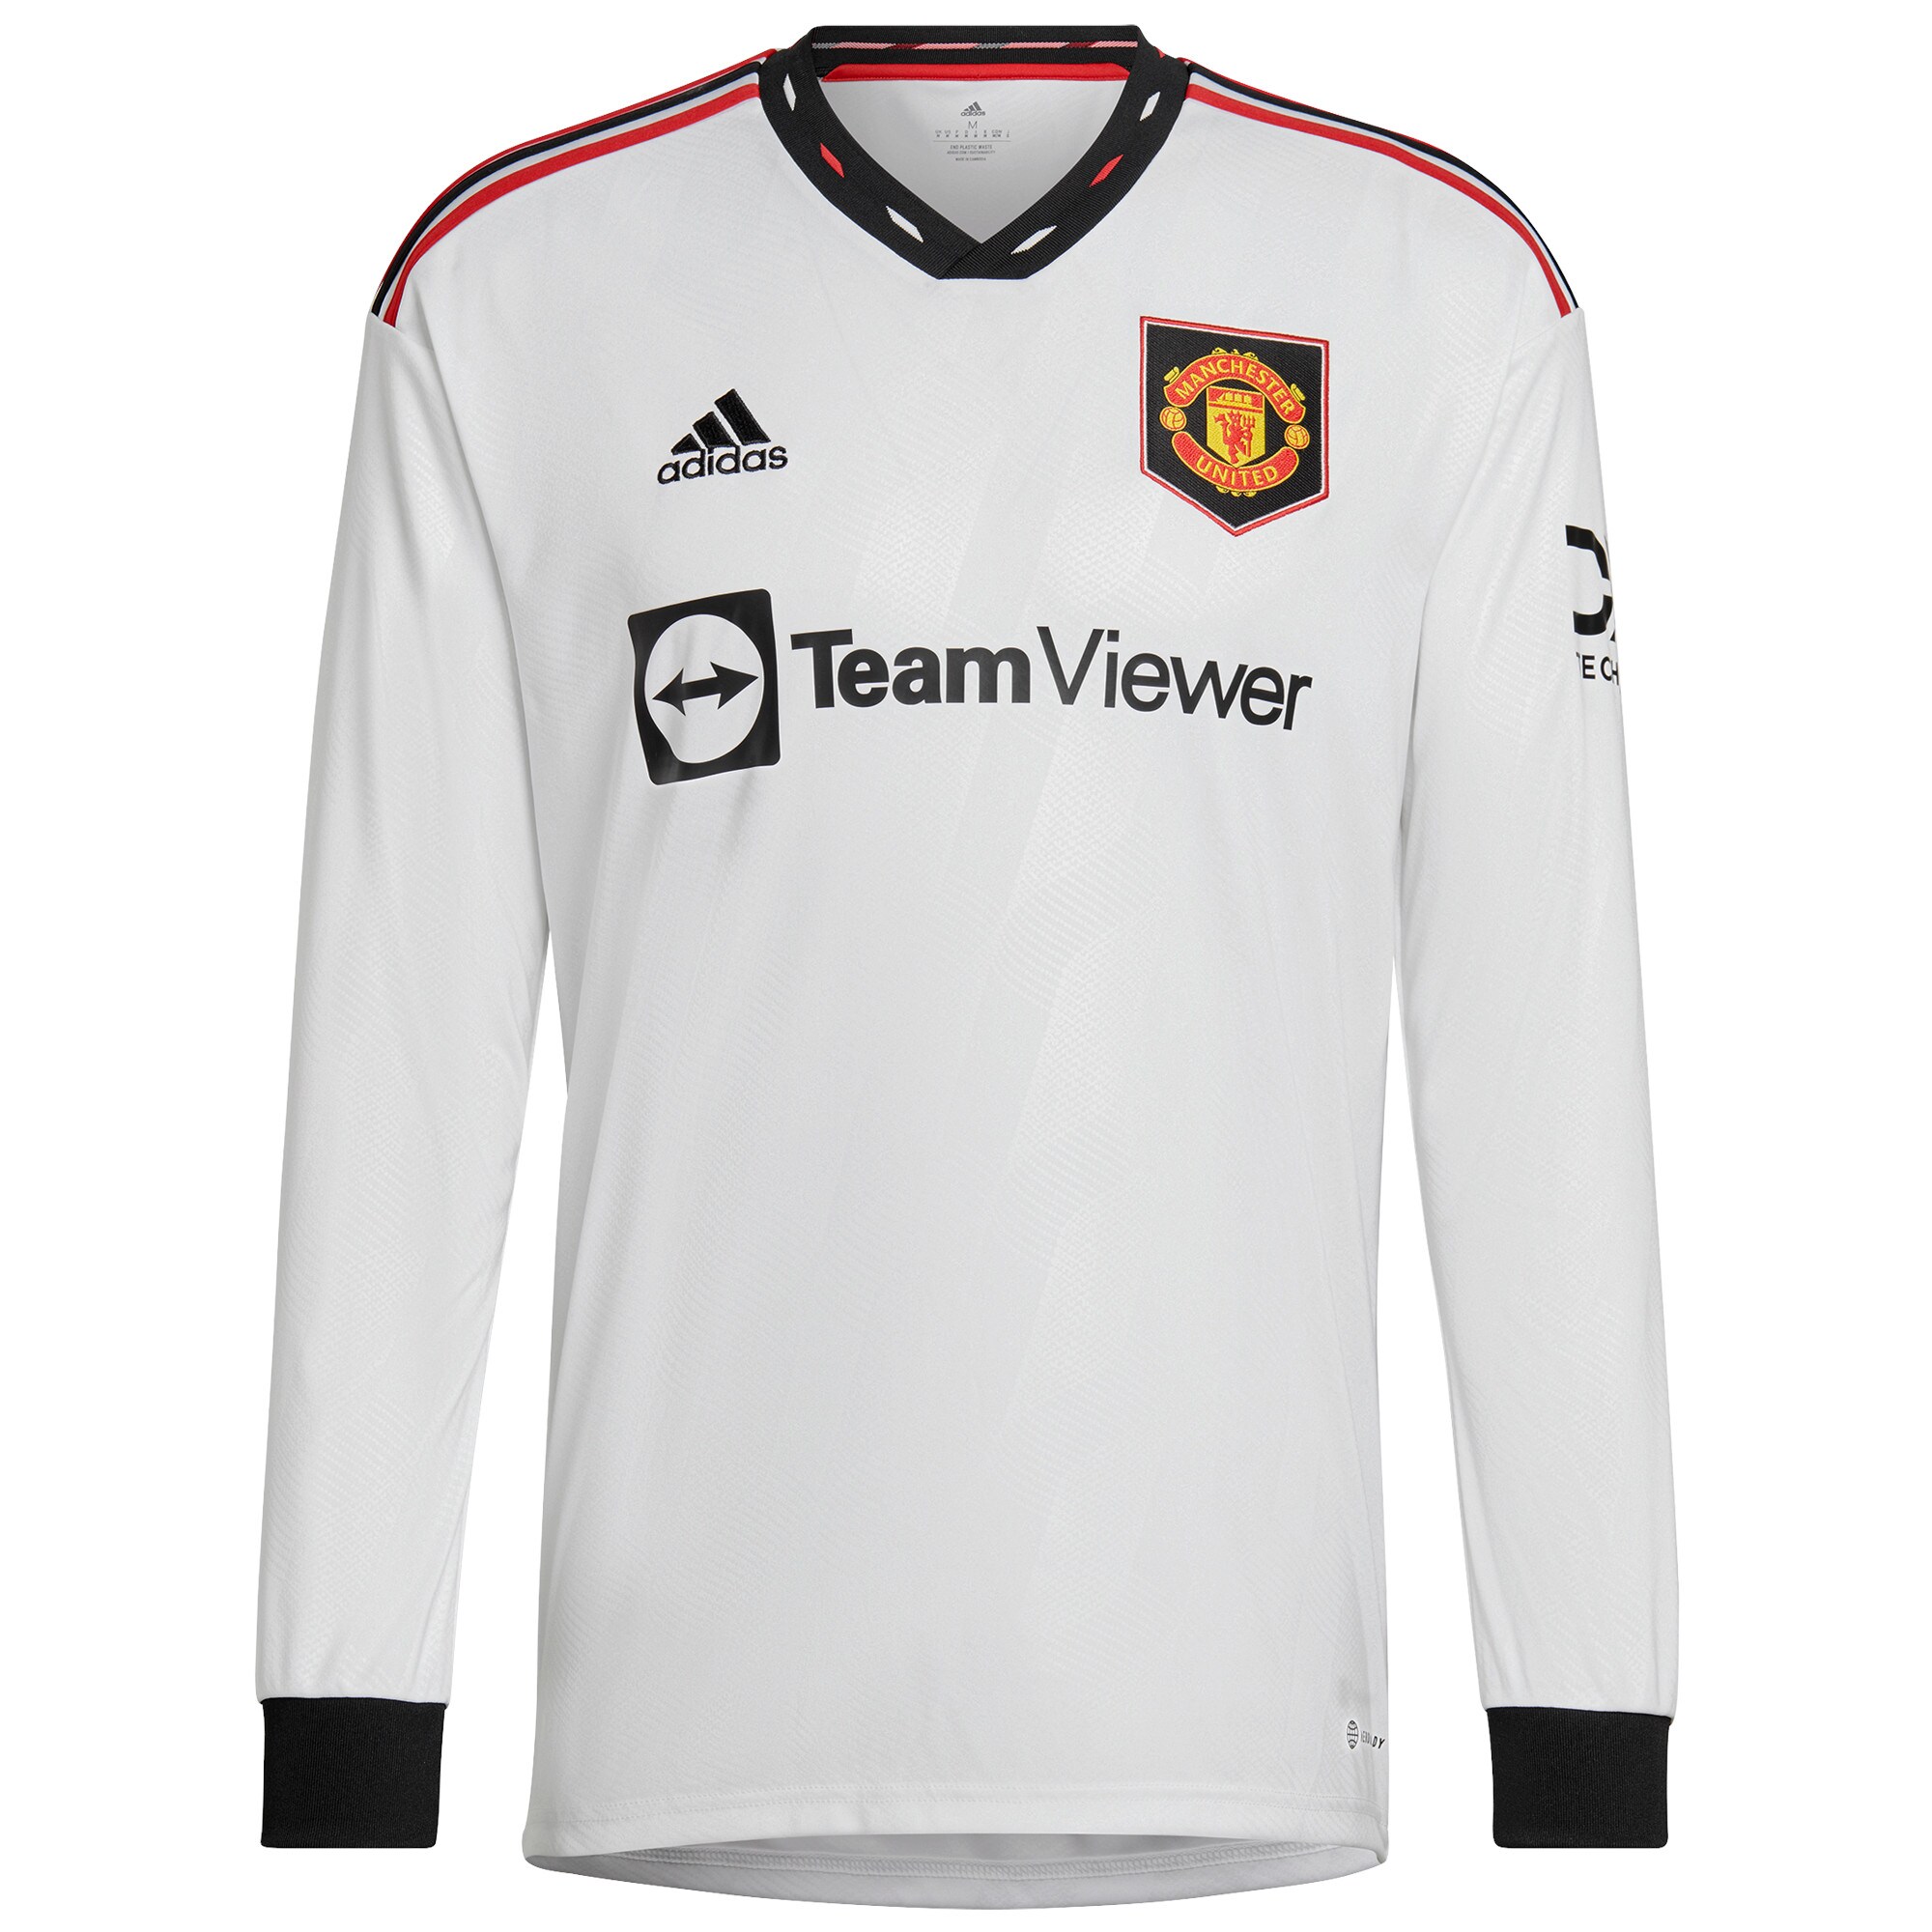 Manchester United Cup Away Shirt 2022-23 - Long Sleeve with Russo 23 printing